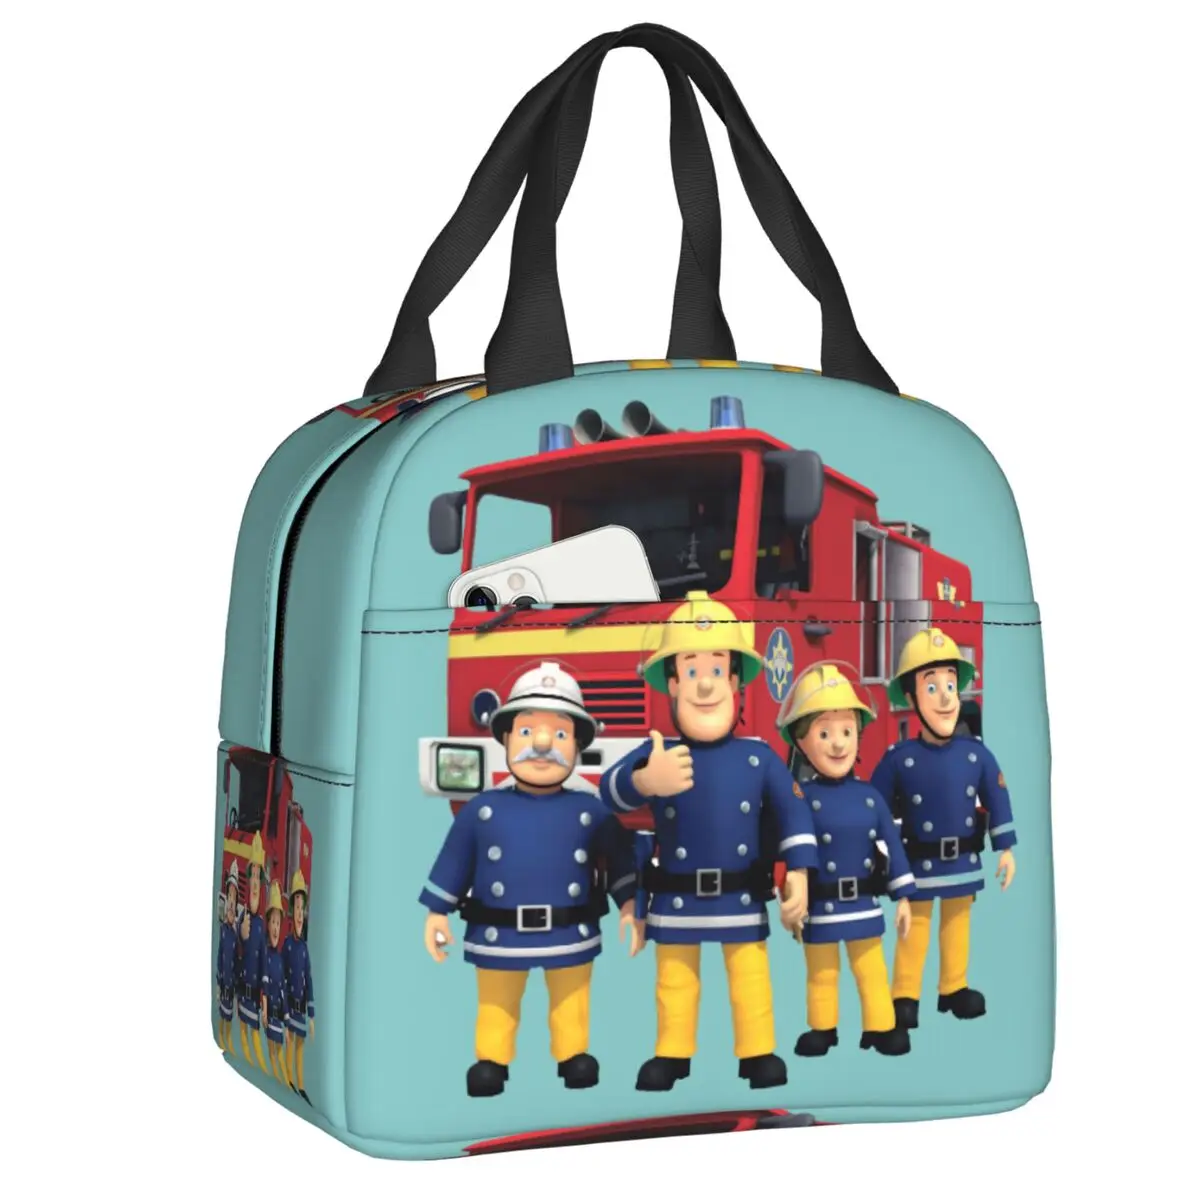 Cartoon Firefighter Fireman Sam Lunch Bag Men Women Thermal Cooler Insulated Lunch Box for Kids School Food Picnic Tote Bags